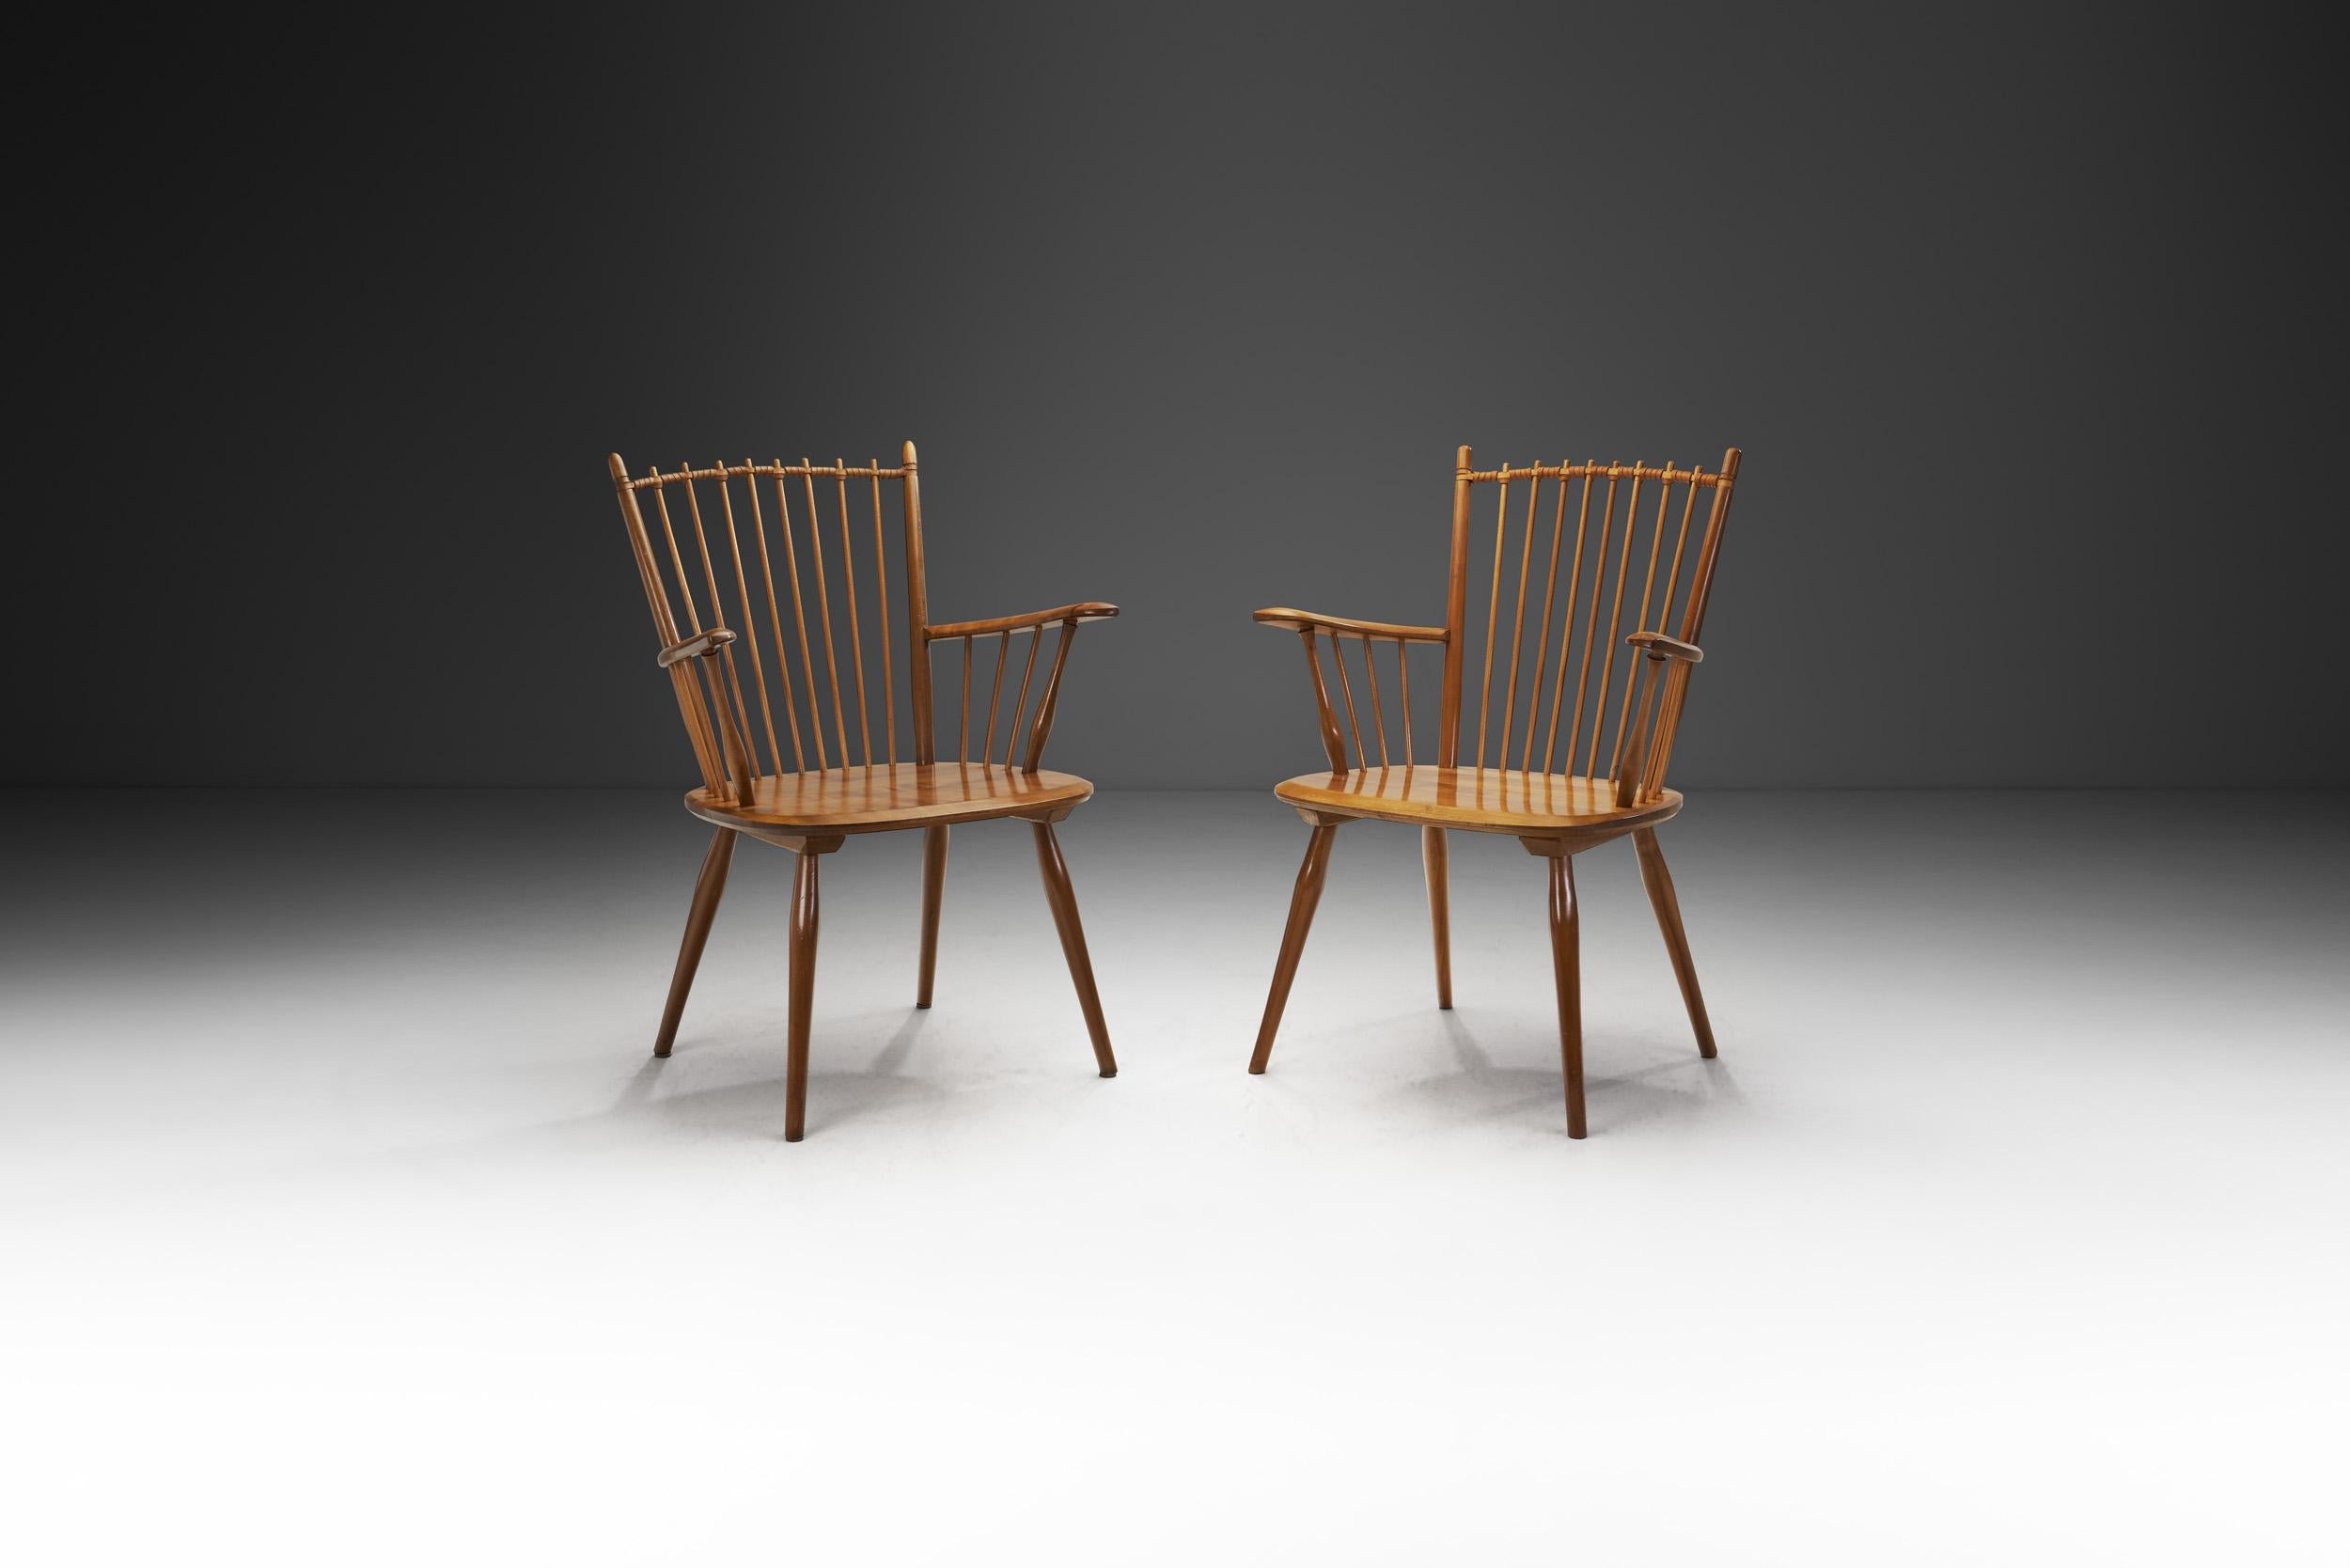 This pair of Arts and Crafts chairs is a version of the perhaps most well-known model of German designer, Albert Haberer. The spindle backs and armrests makes the design an immediately recognizable piece of German mid-century design history.

Wood